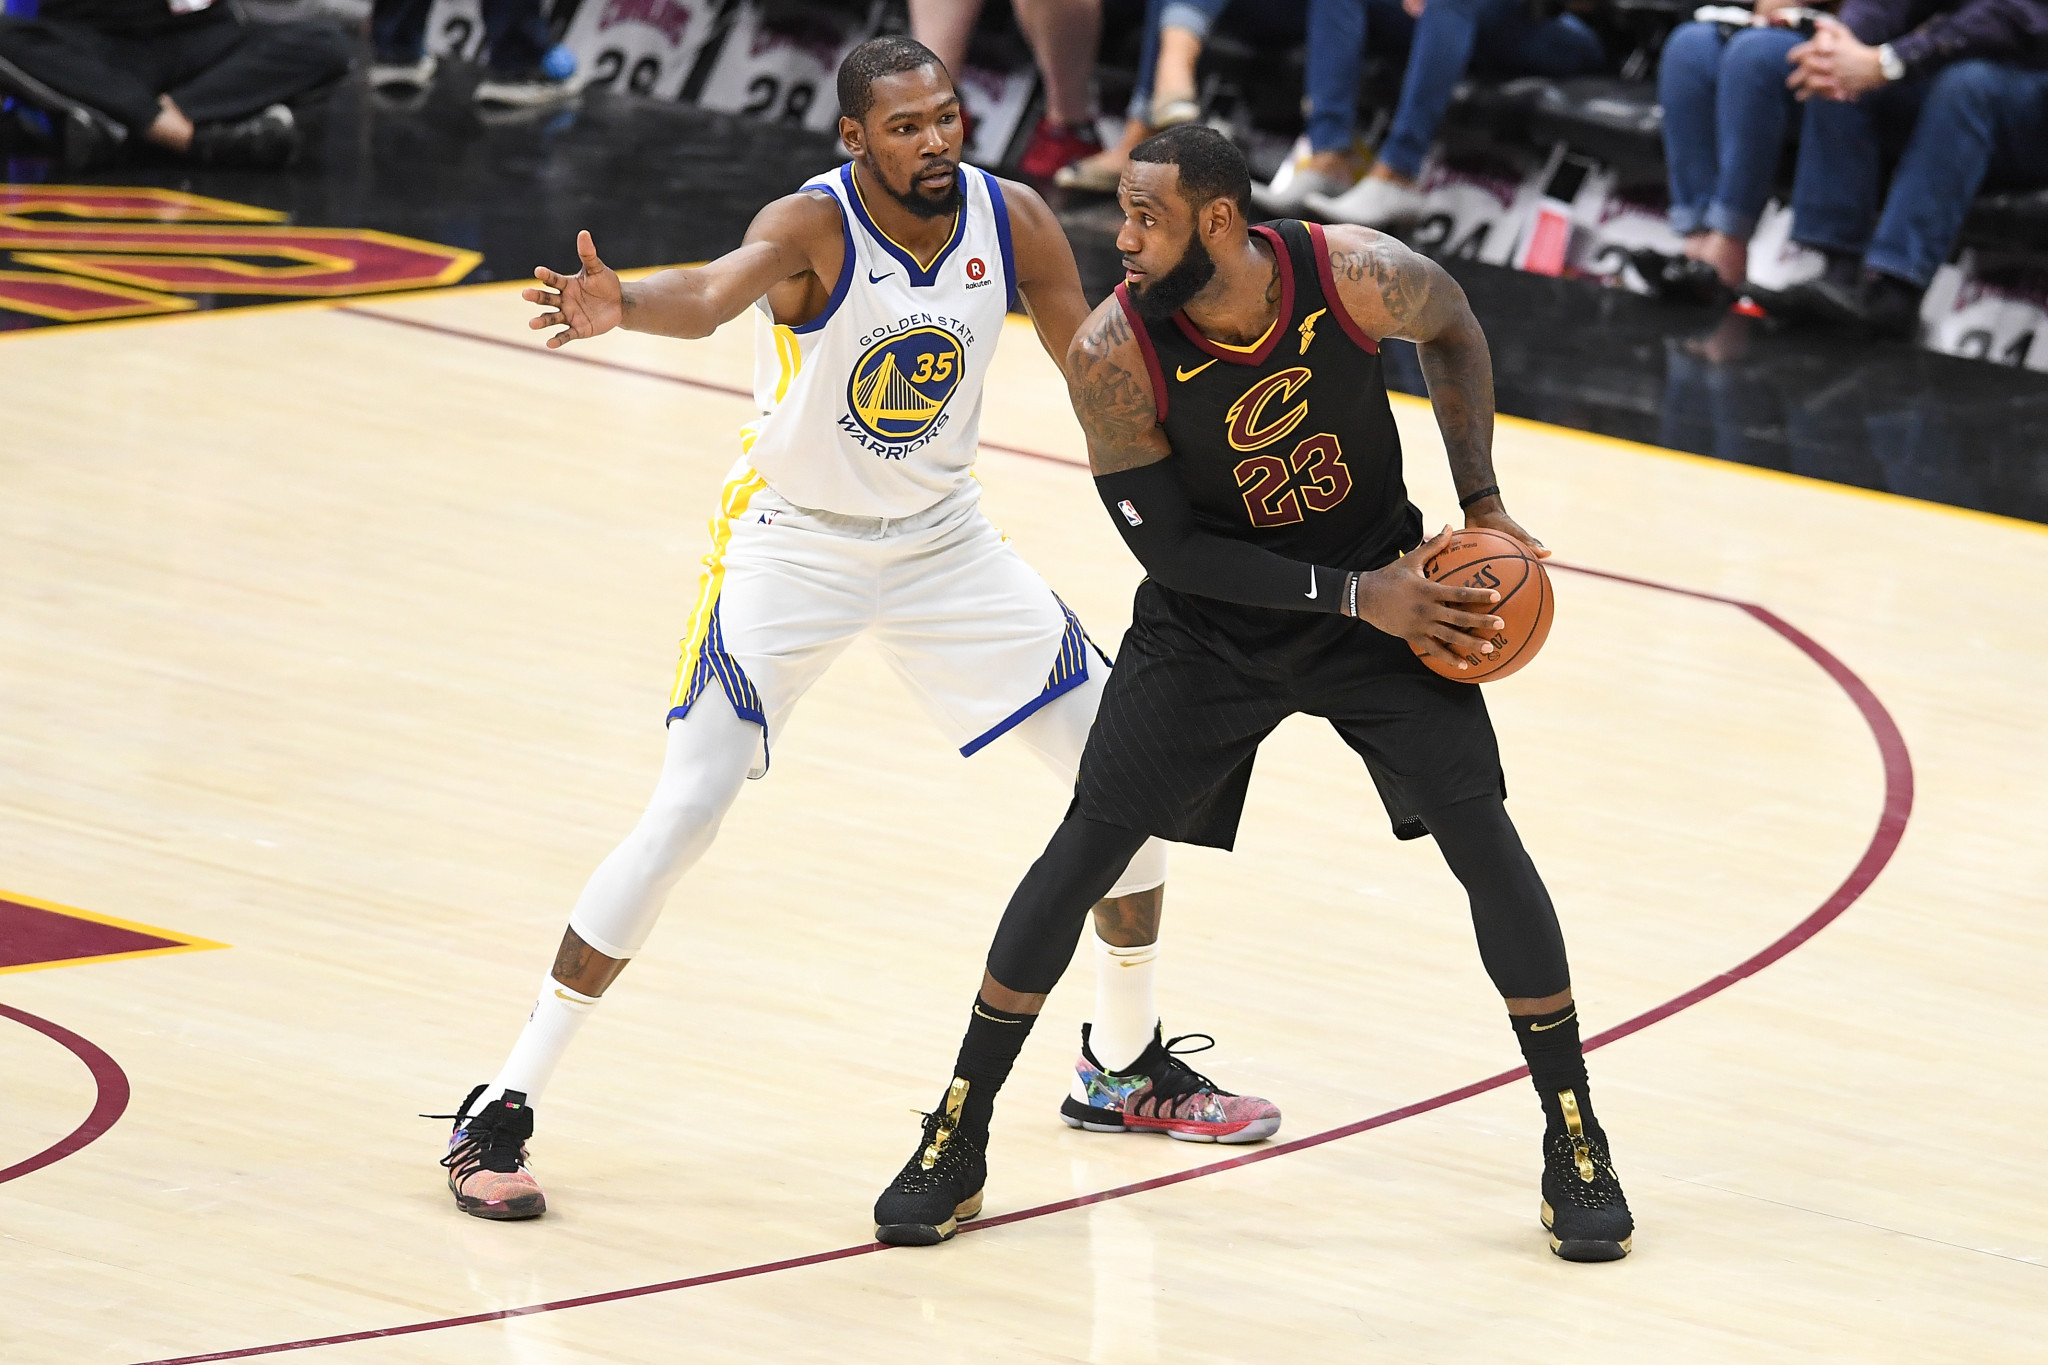 The Cleveland cavaliers reached the NBA Finals in their last Playoffs appearance in 2018 ©Getty Images